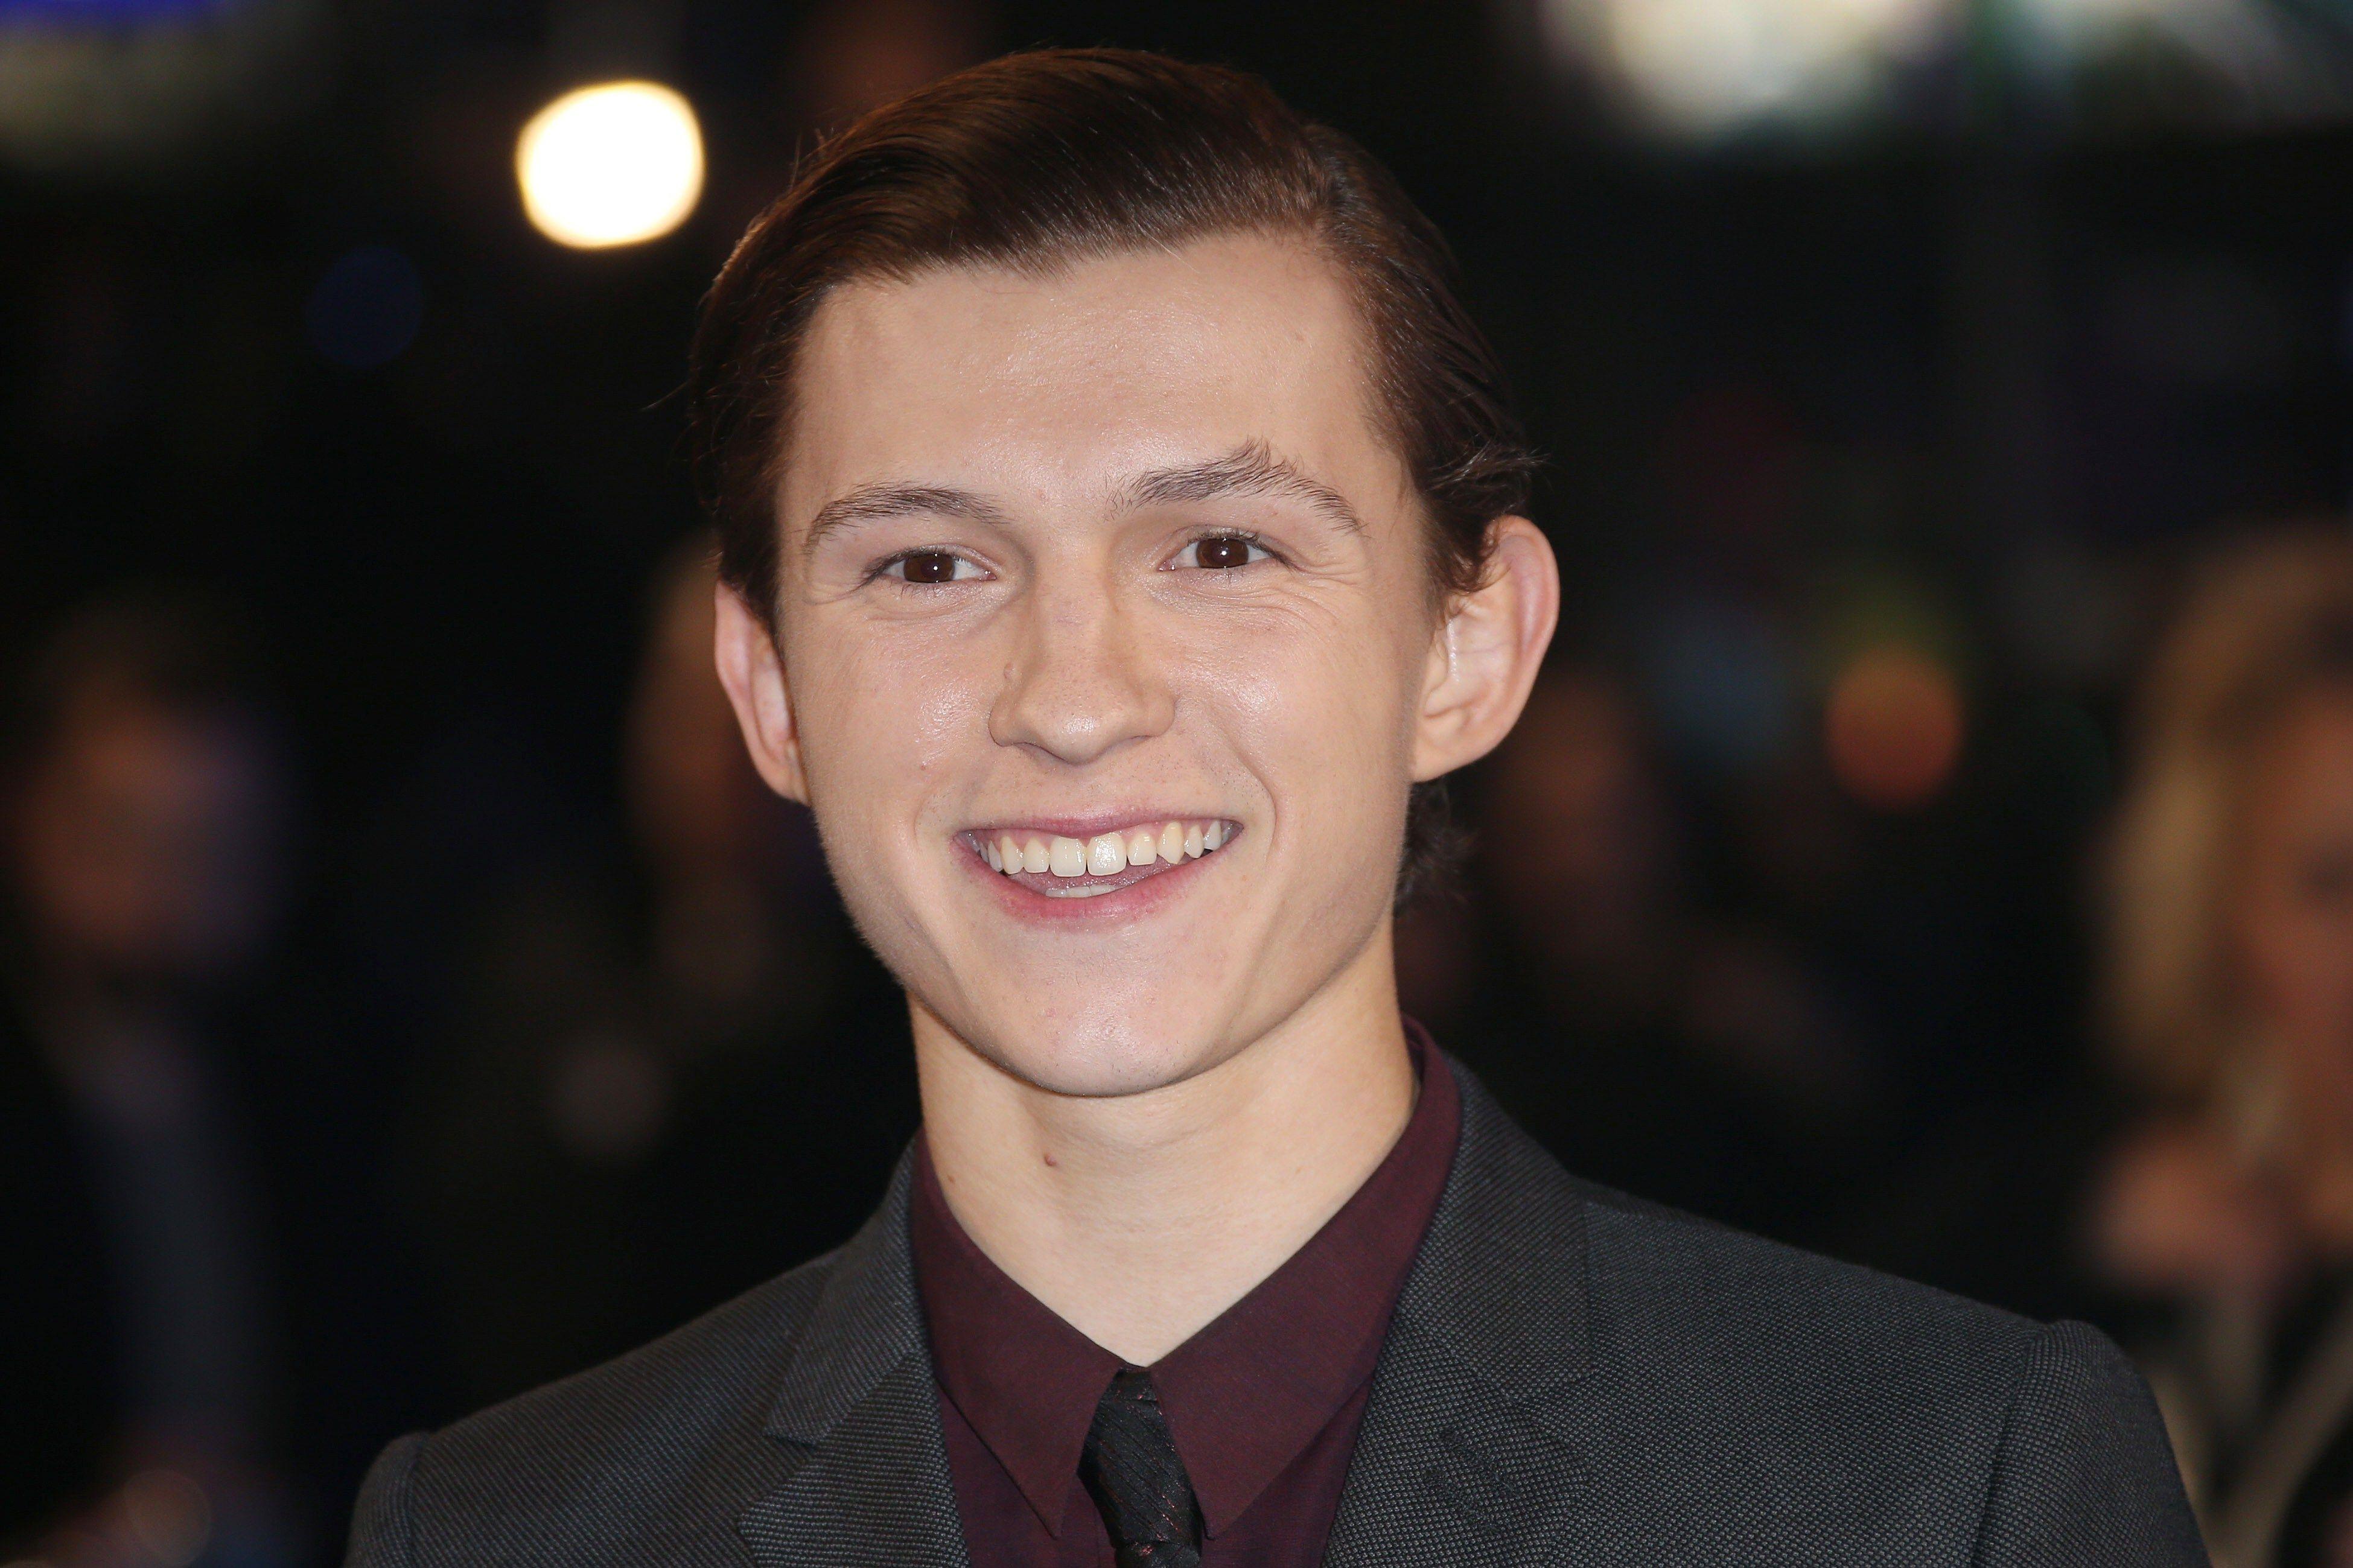 Tom Holland Smile Wallpaper Background 57279 3899x2599 px